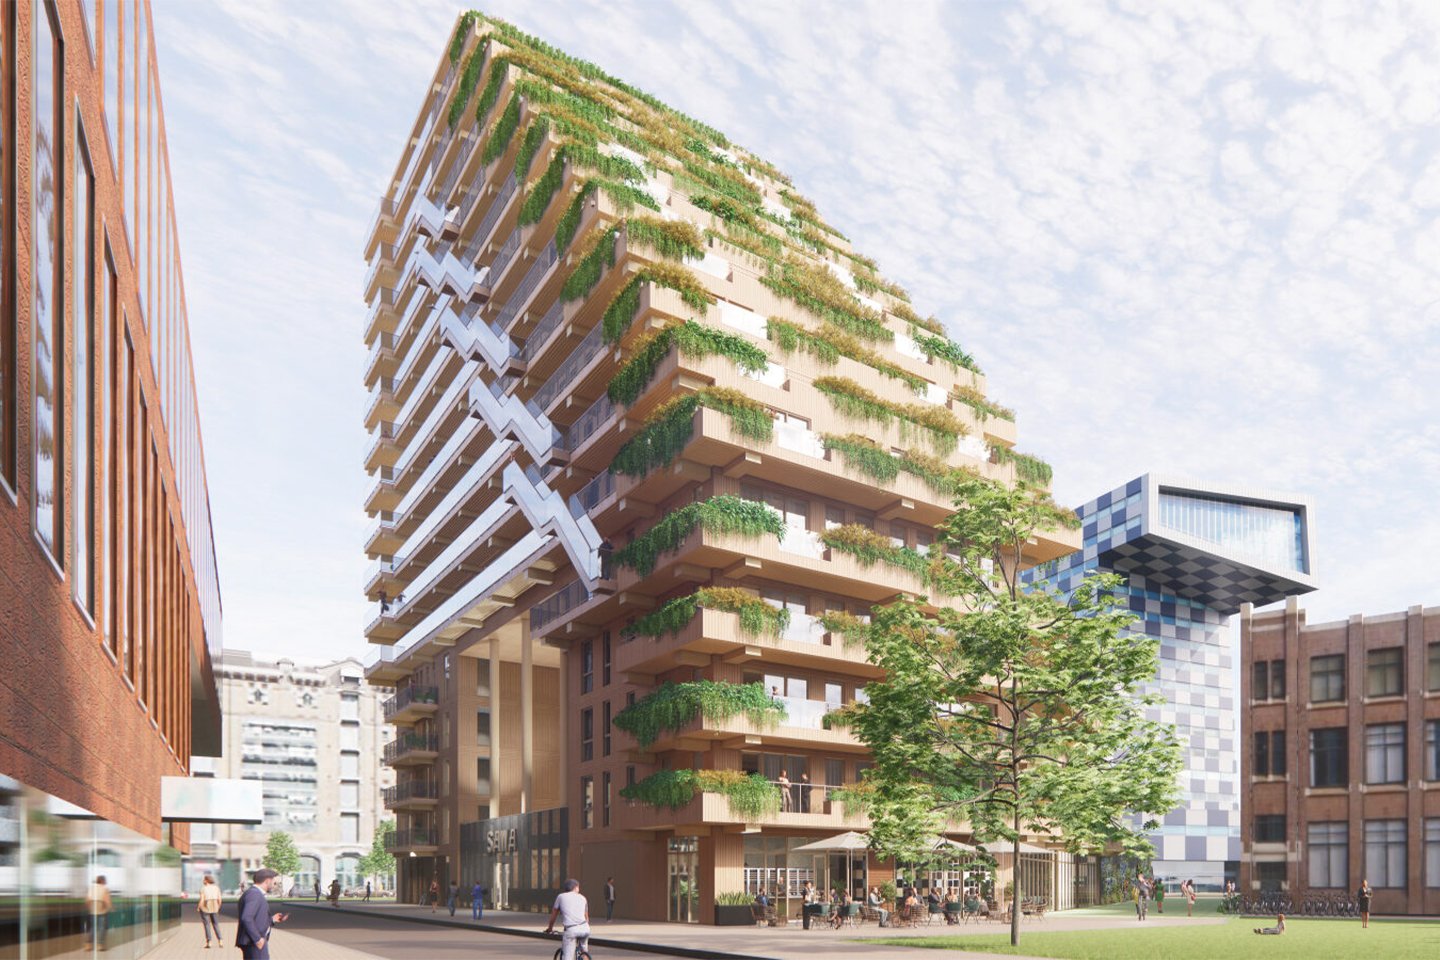 #This sustainable apartment uses 90% wood in its construction